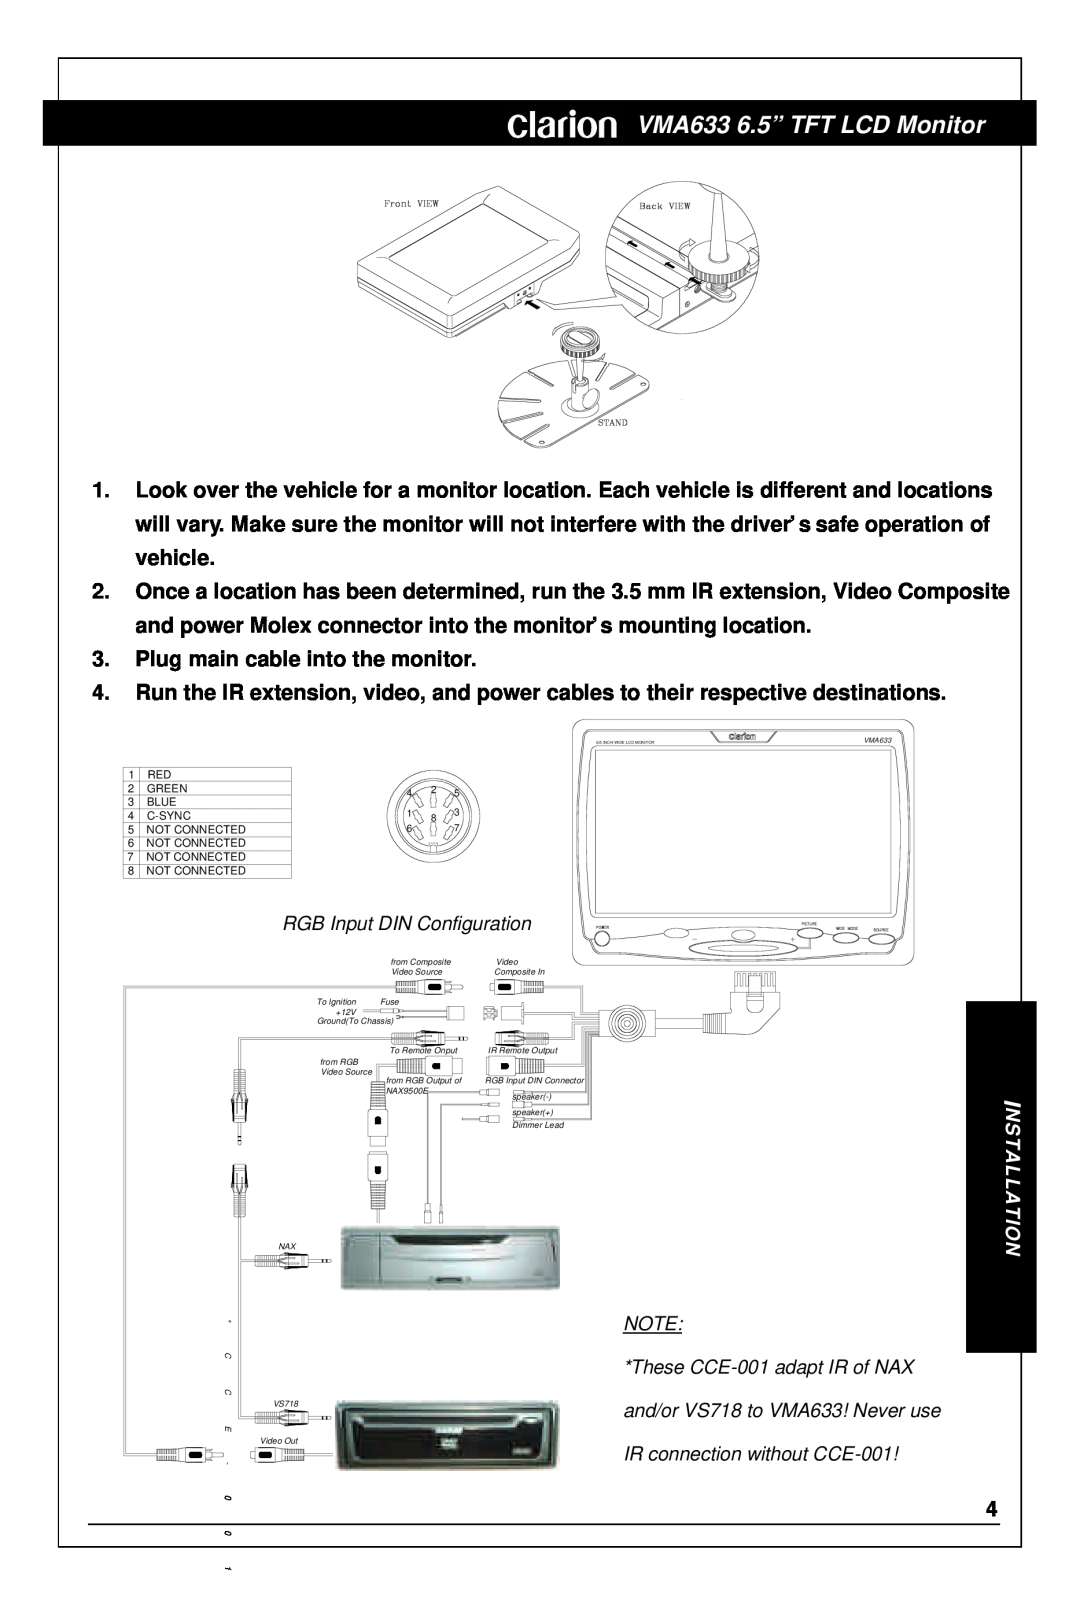 Clarion owner manual Nstallation, VMA633 6.5” TFT LCD Monitor, Plug main cable into the monitor 